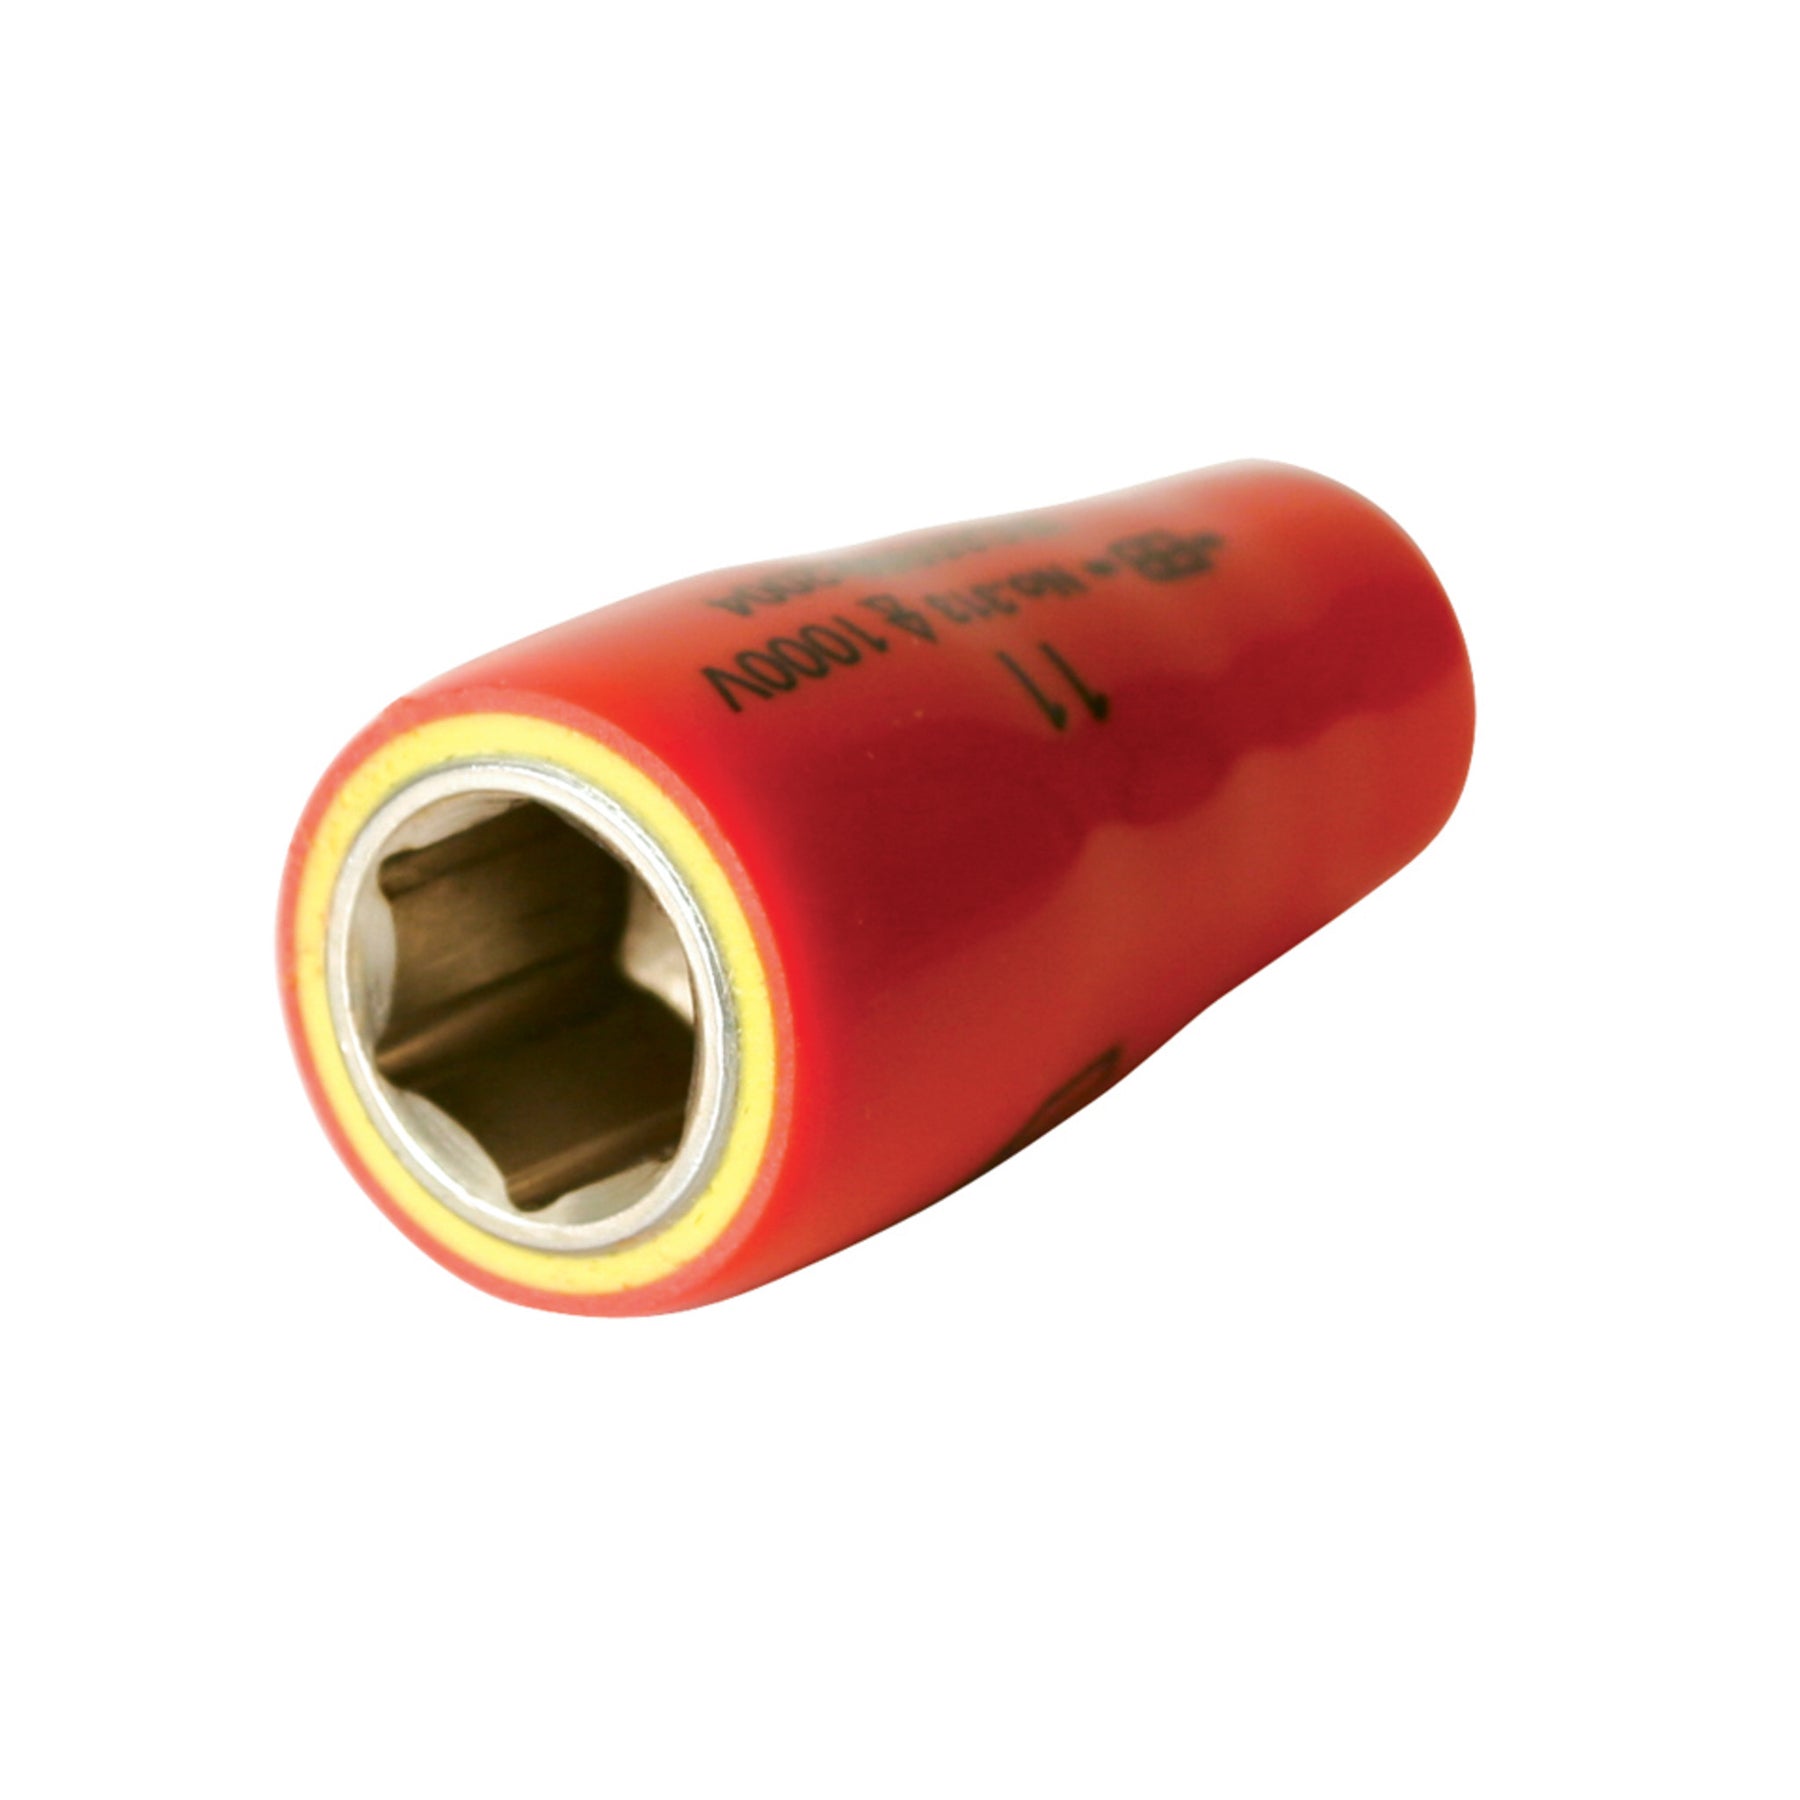 Insulated Socket 1/4" Drive 8mm